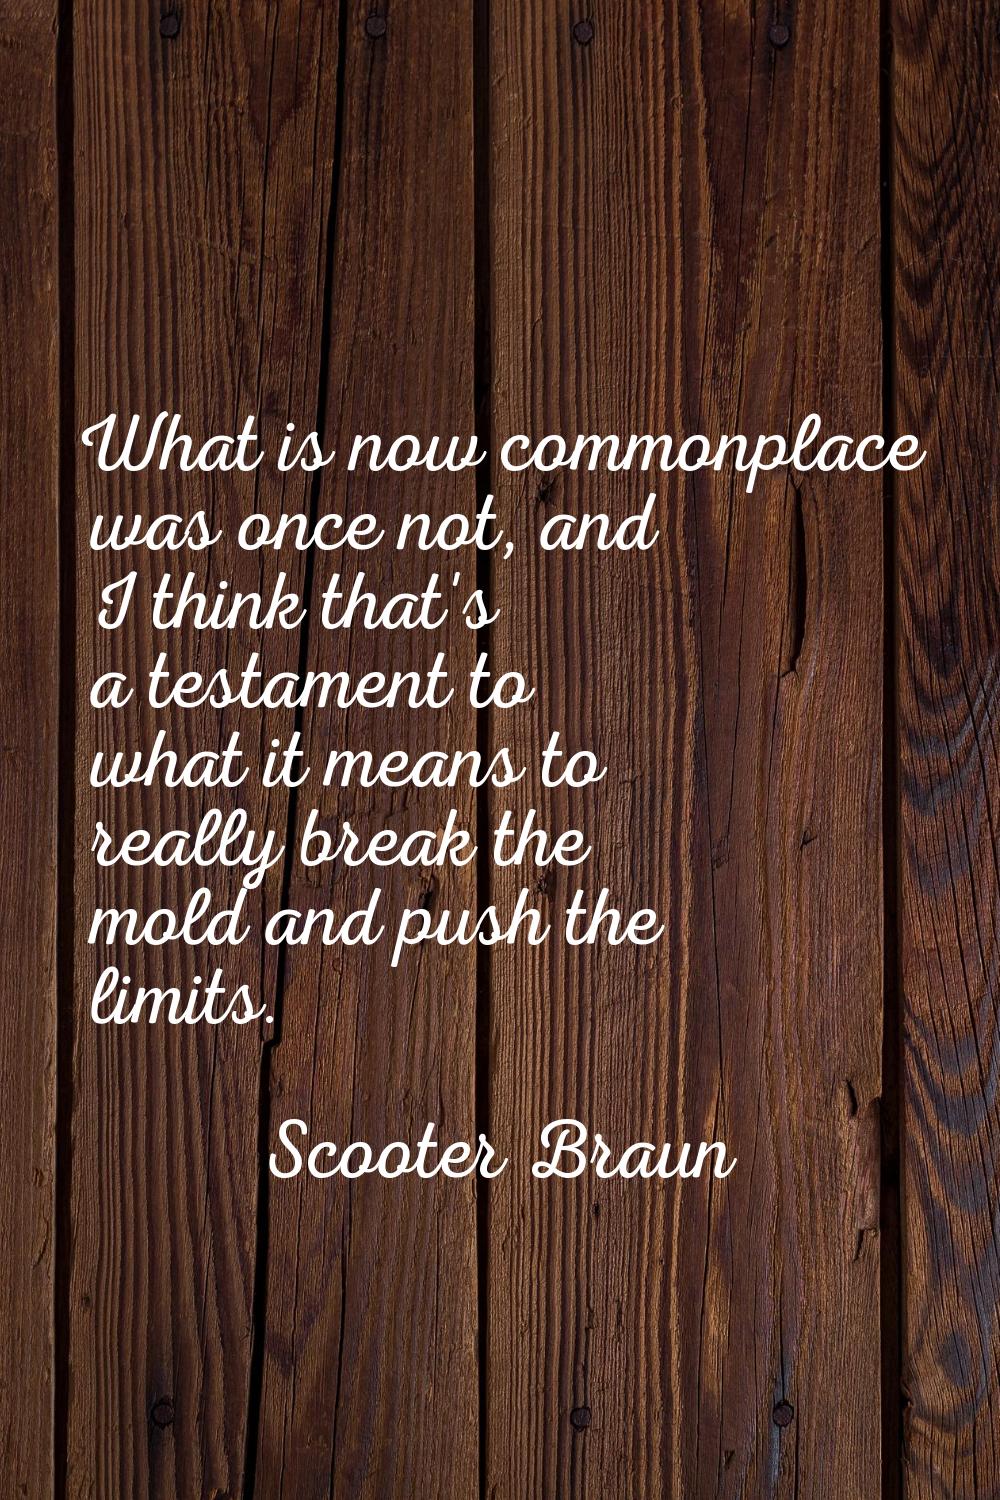 What is now commonplace was once not, and I think that's a testament to what it means to really bre